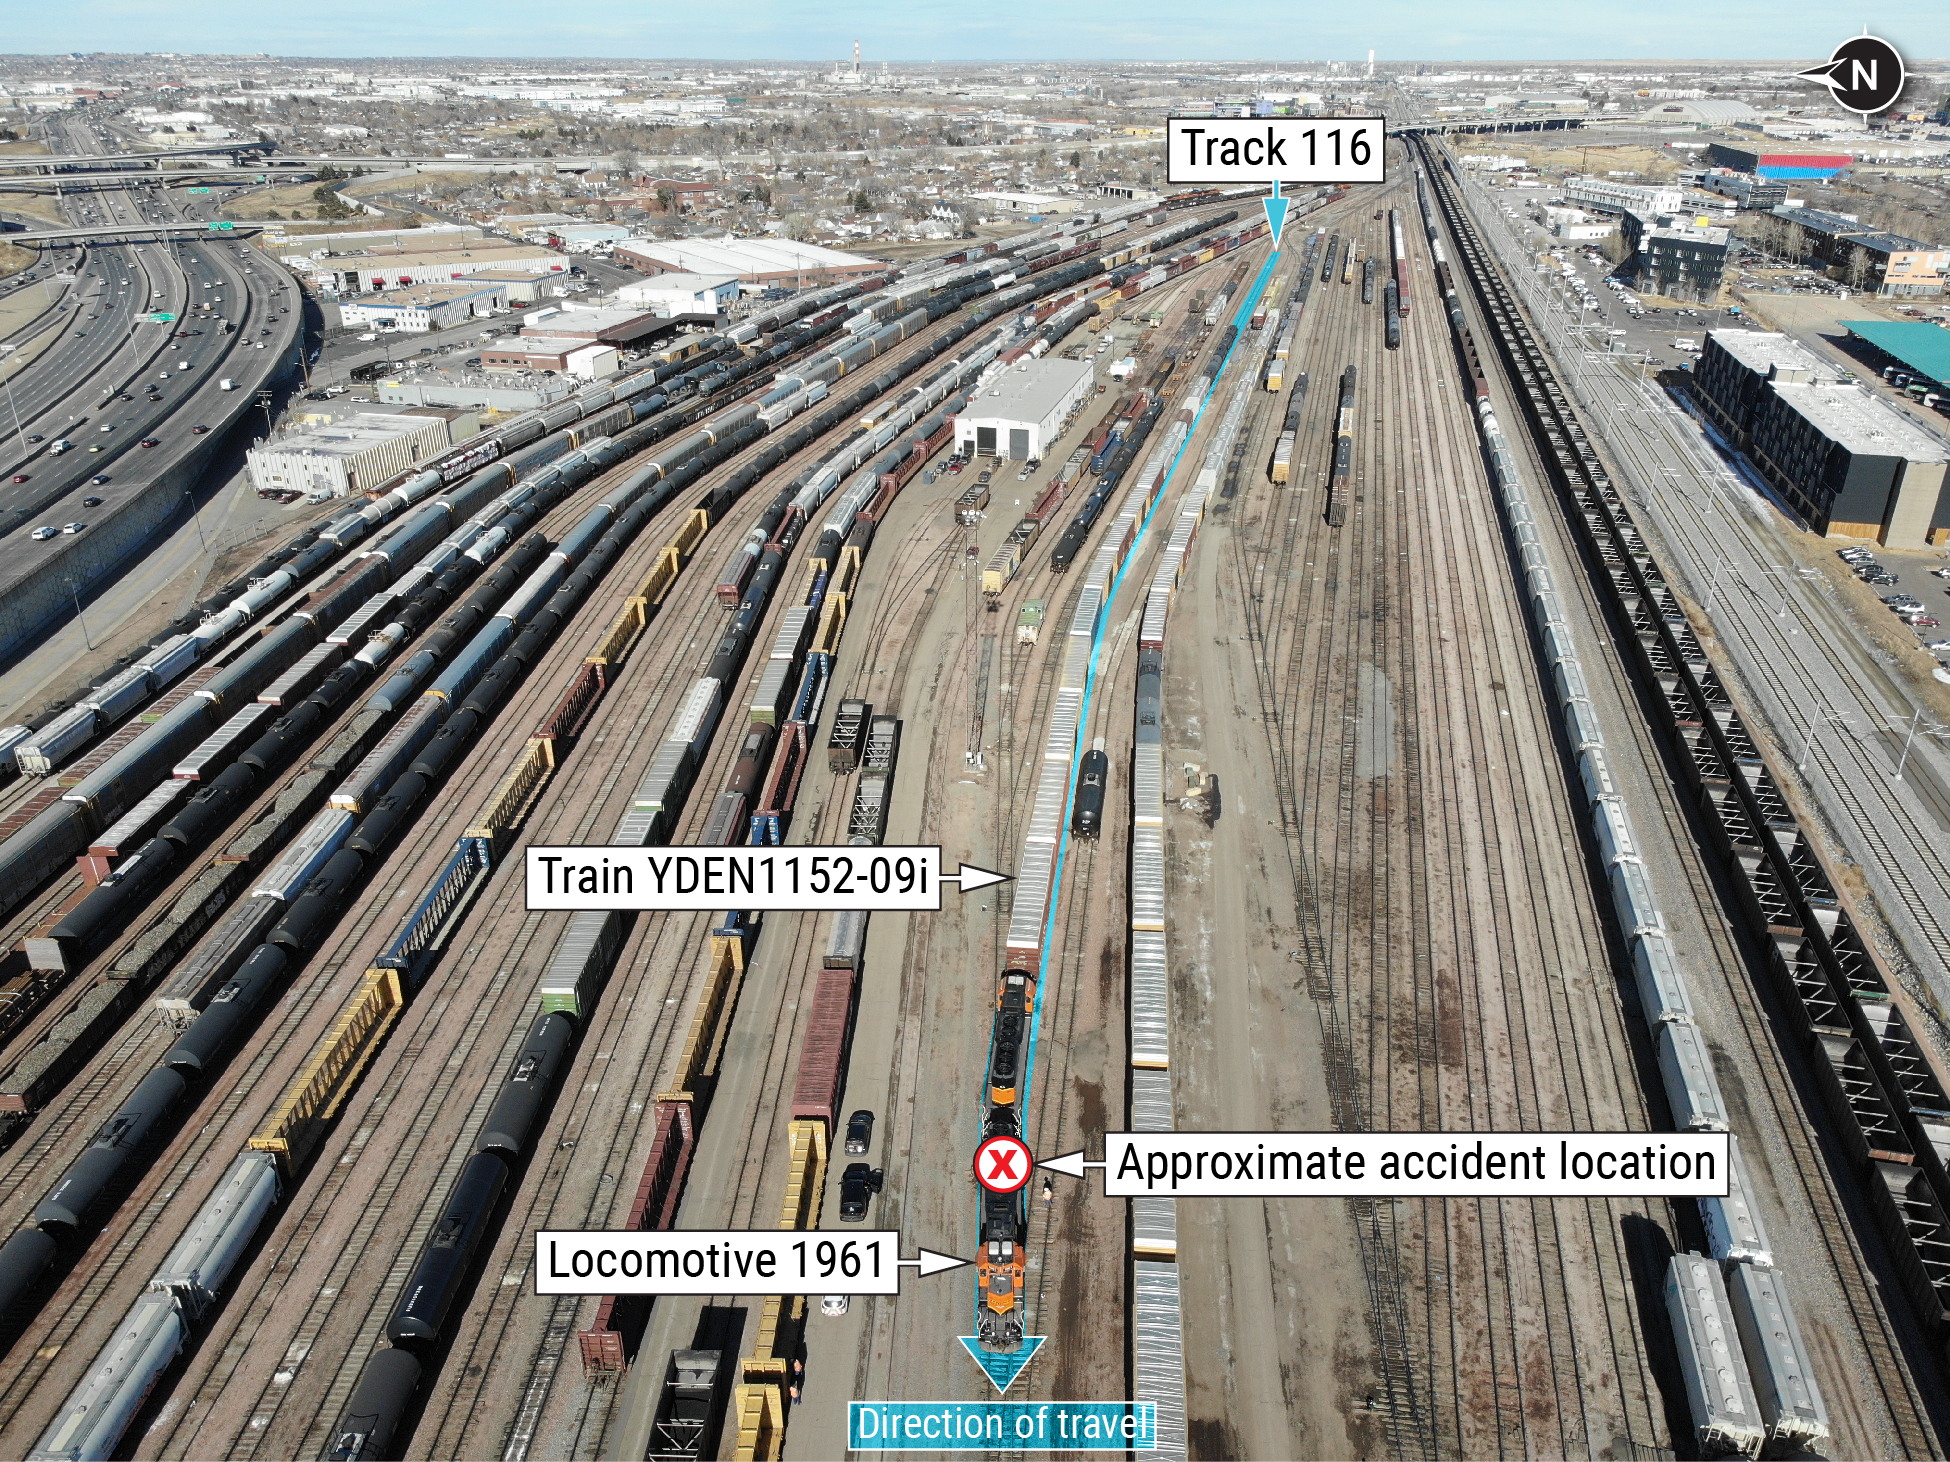 Overhead of accident location. (Source: BNSF Railway.)